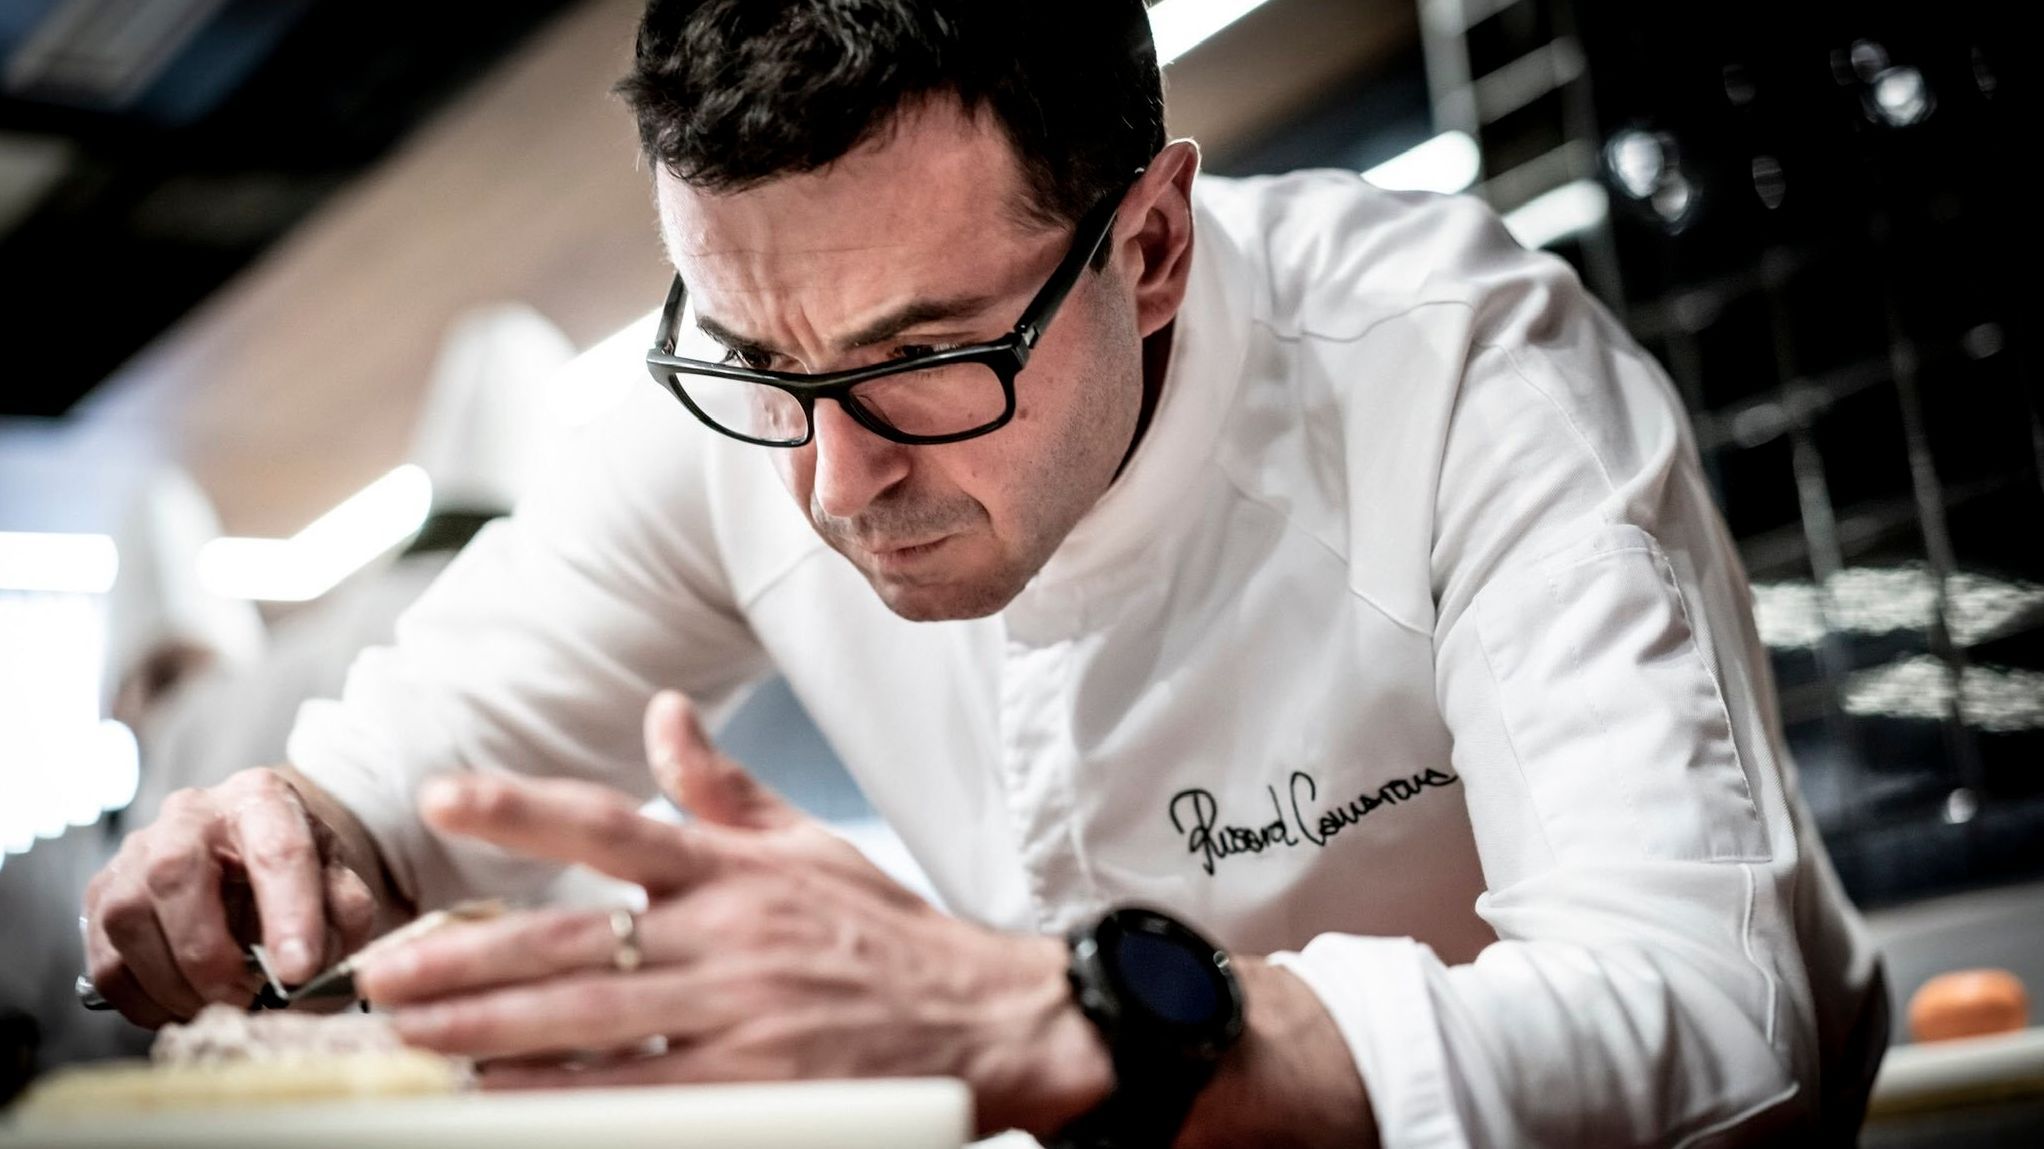 The vegetable restaurant of the Valencian chef Ricard Camarena, eighth best in the world